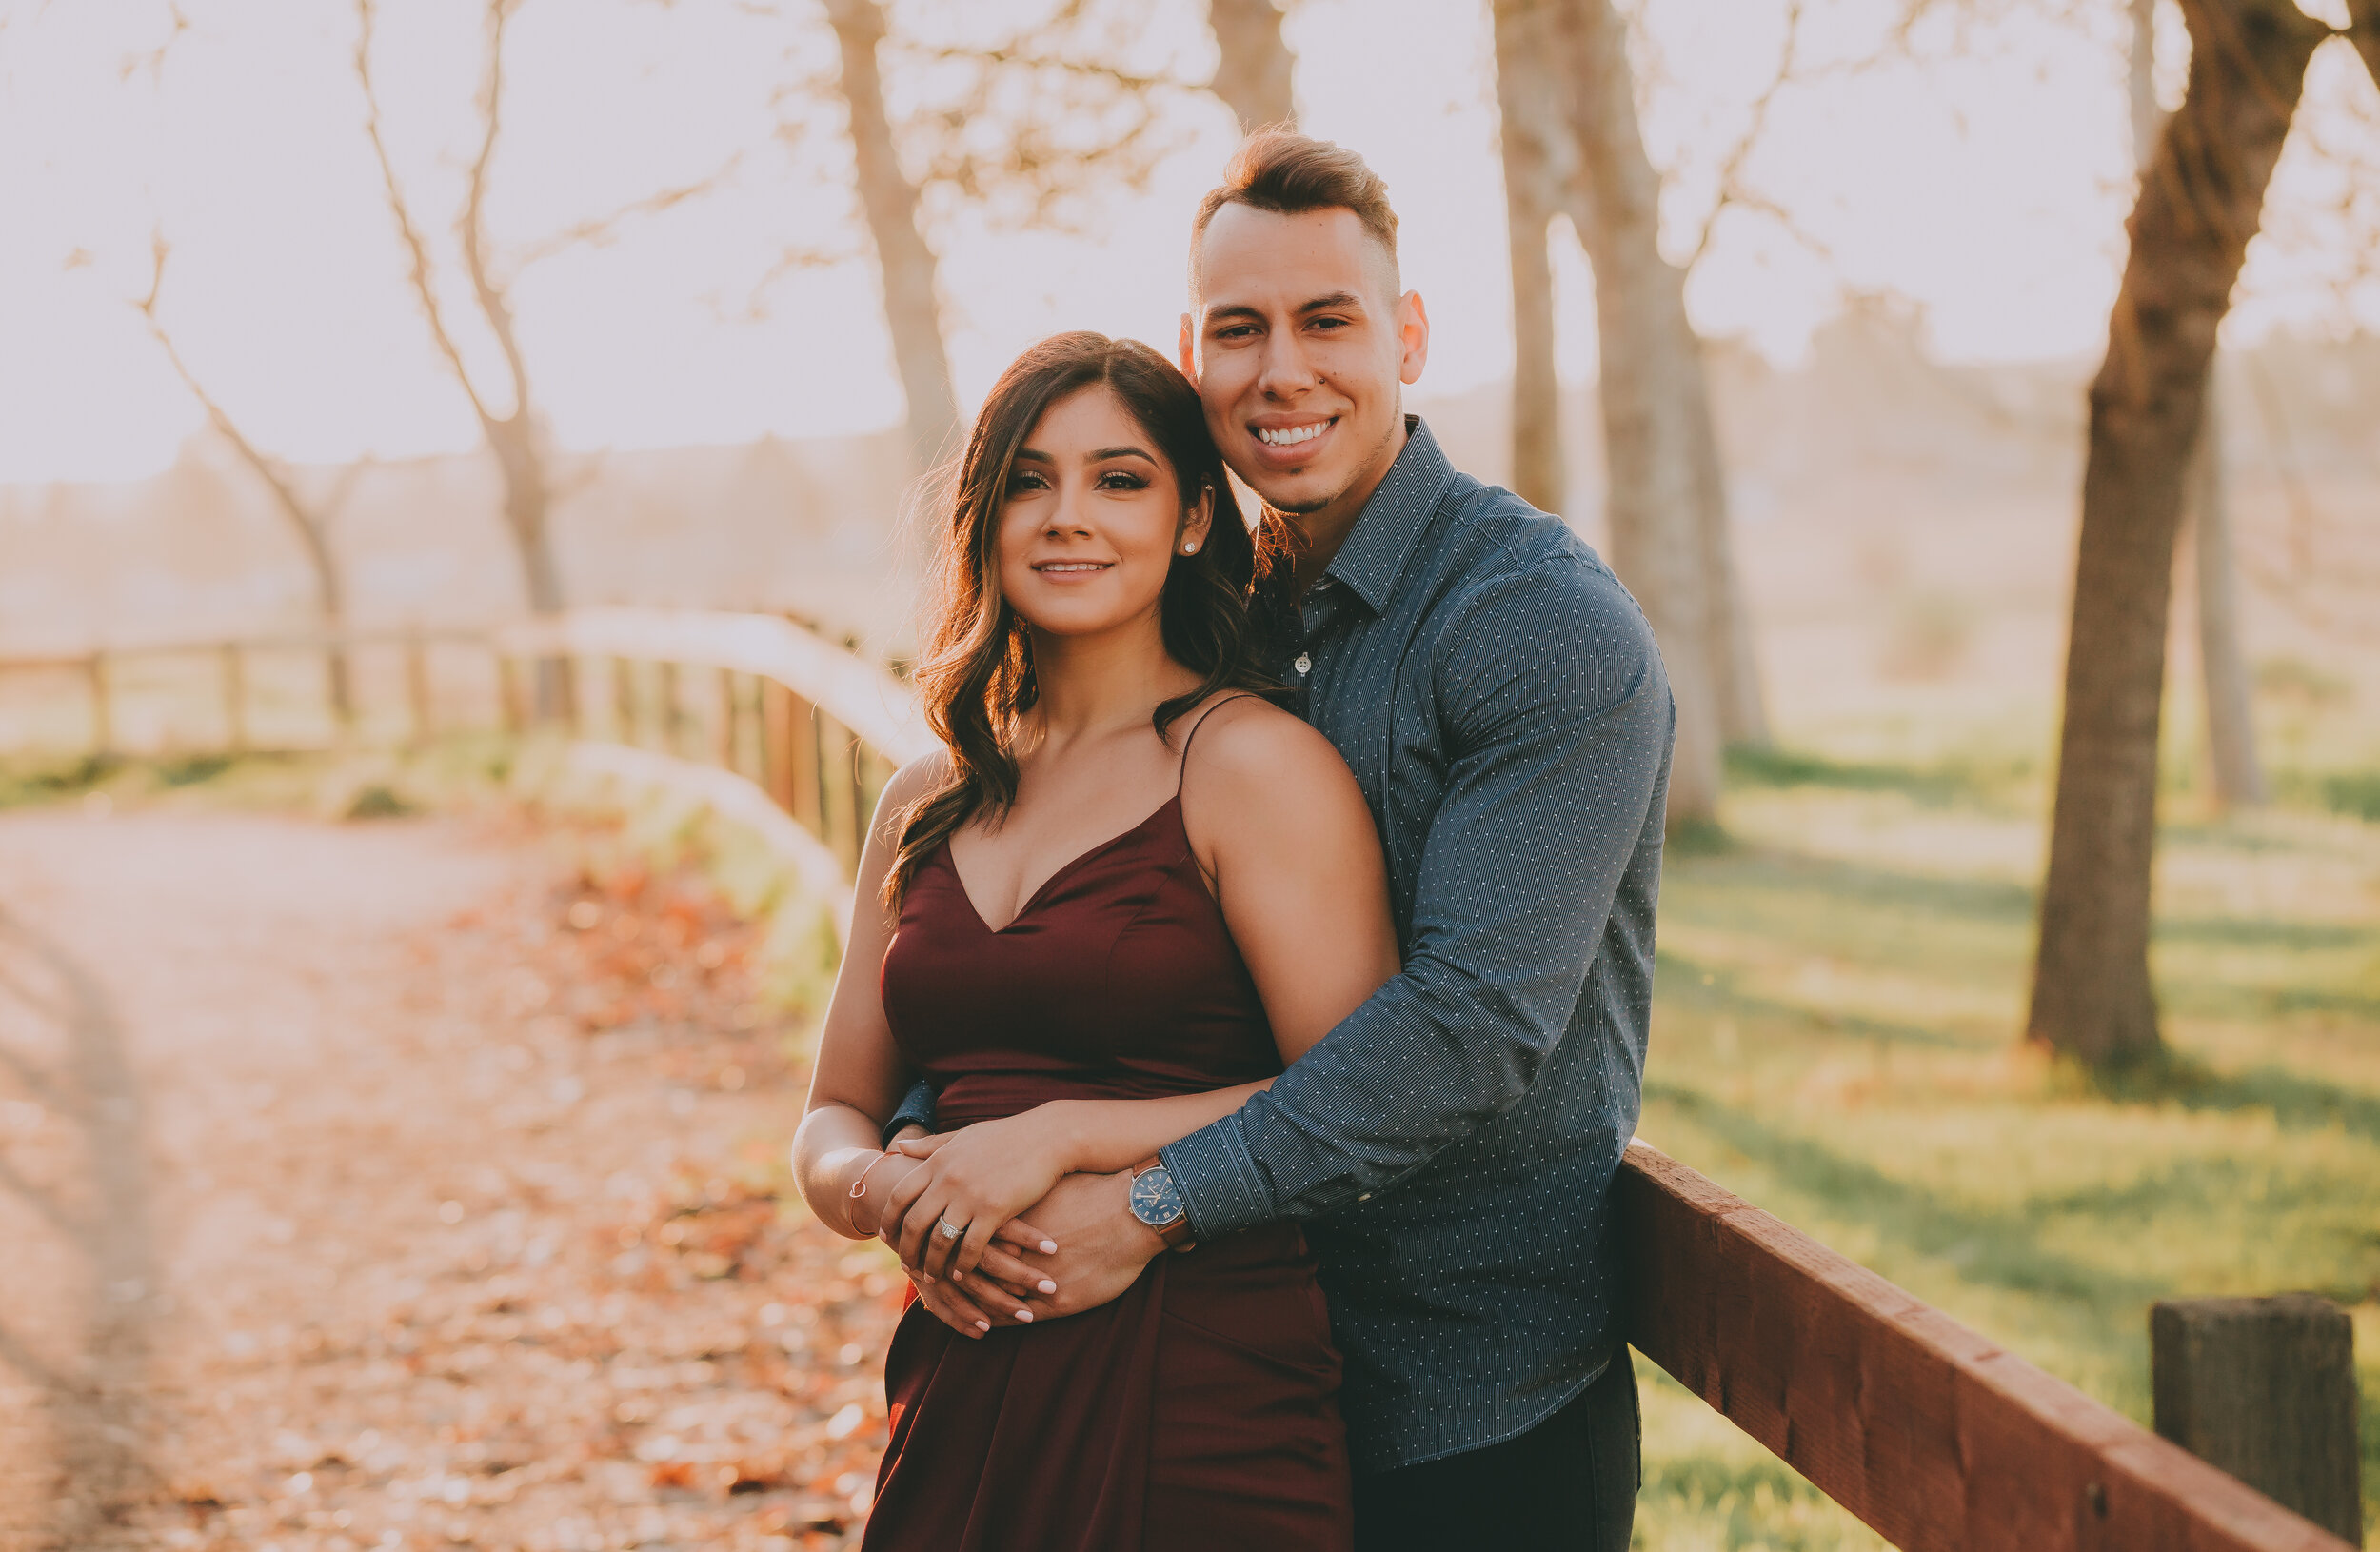 Fresno Engagament Photos - The Clausen Gallery - Samantha and Jesus-25.jpg